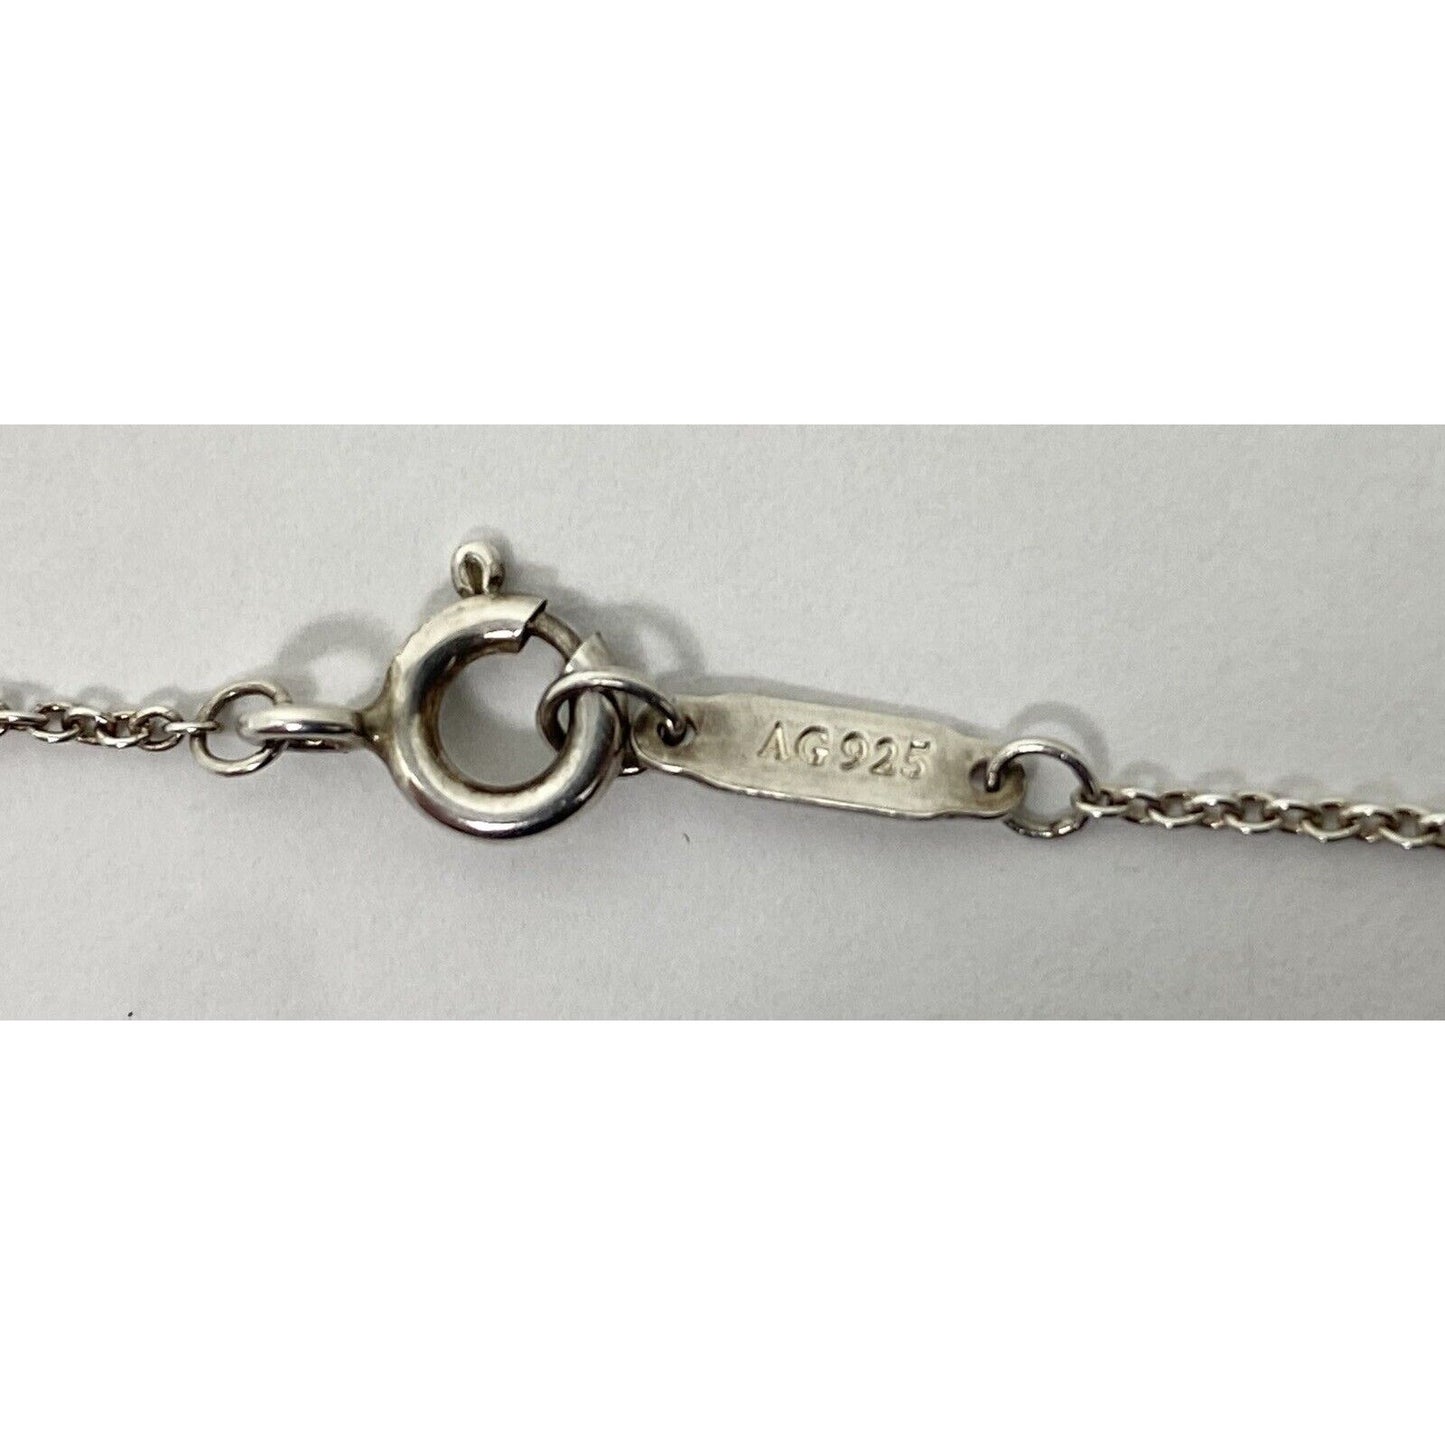 Tiffany & Co 925 Sterling Silver "Mom" Heart Key Pendant Charm 16" Necklace